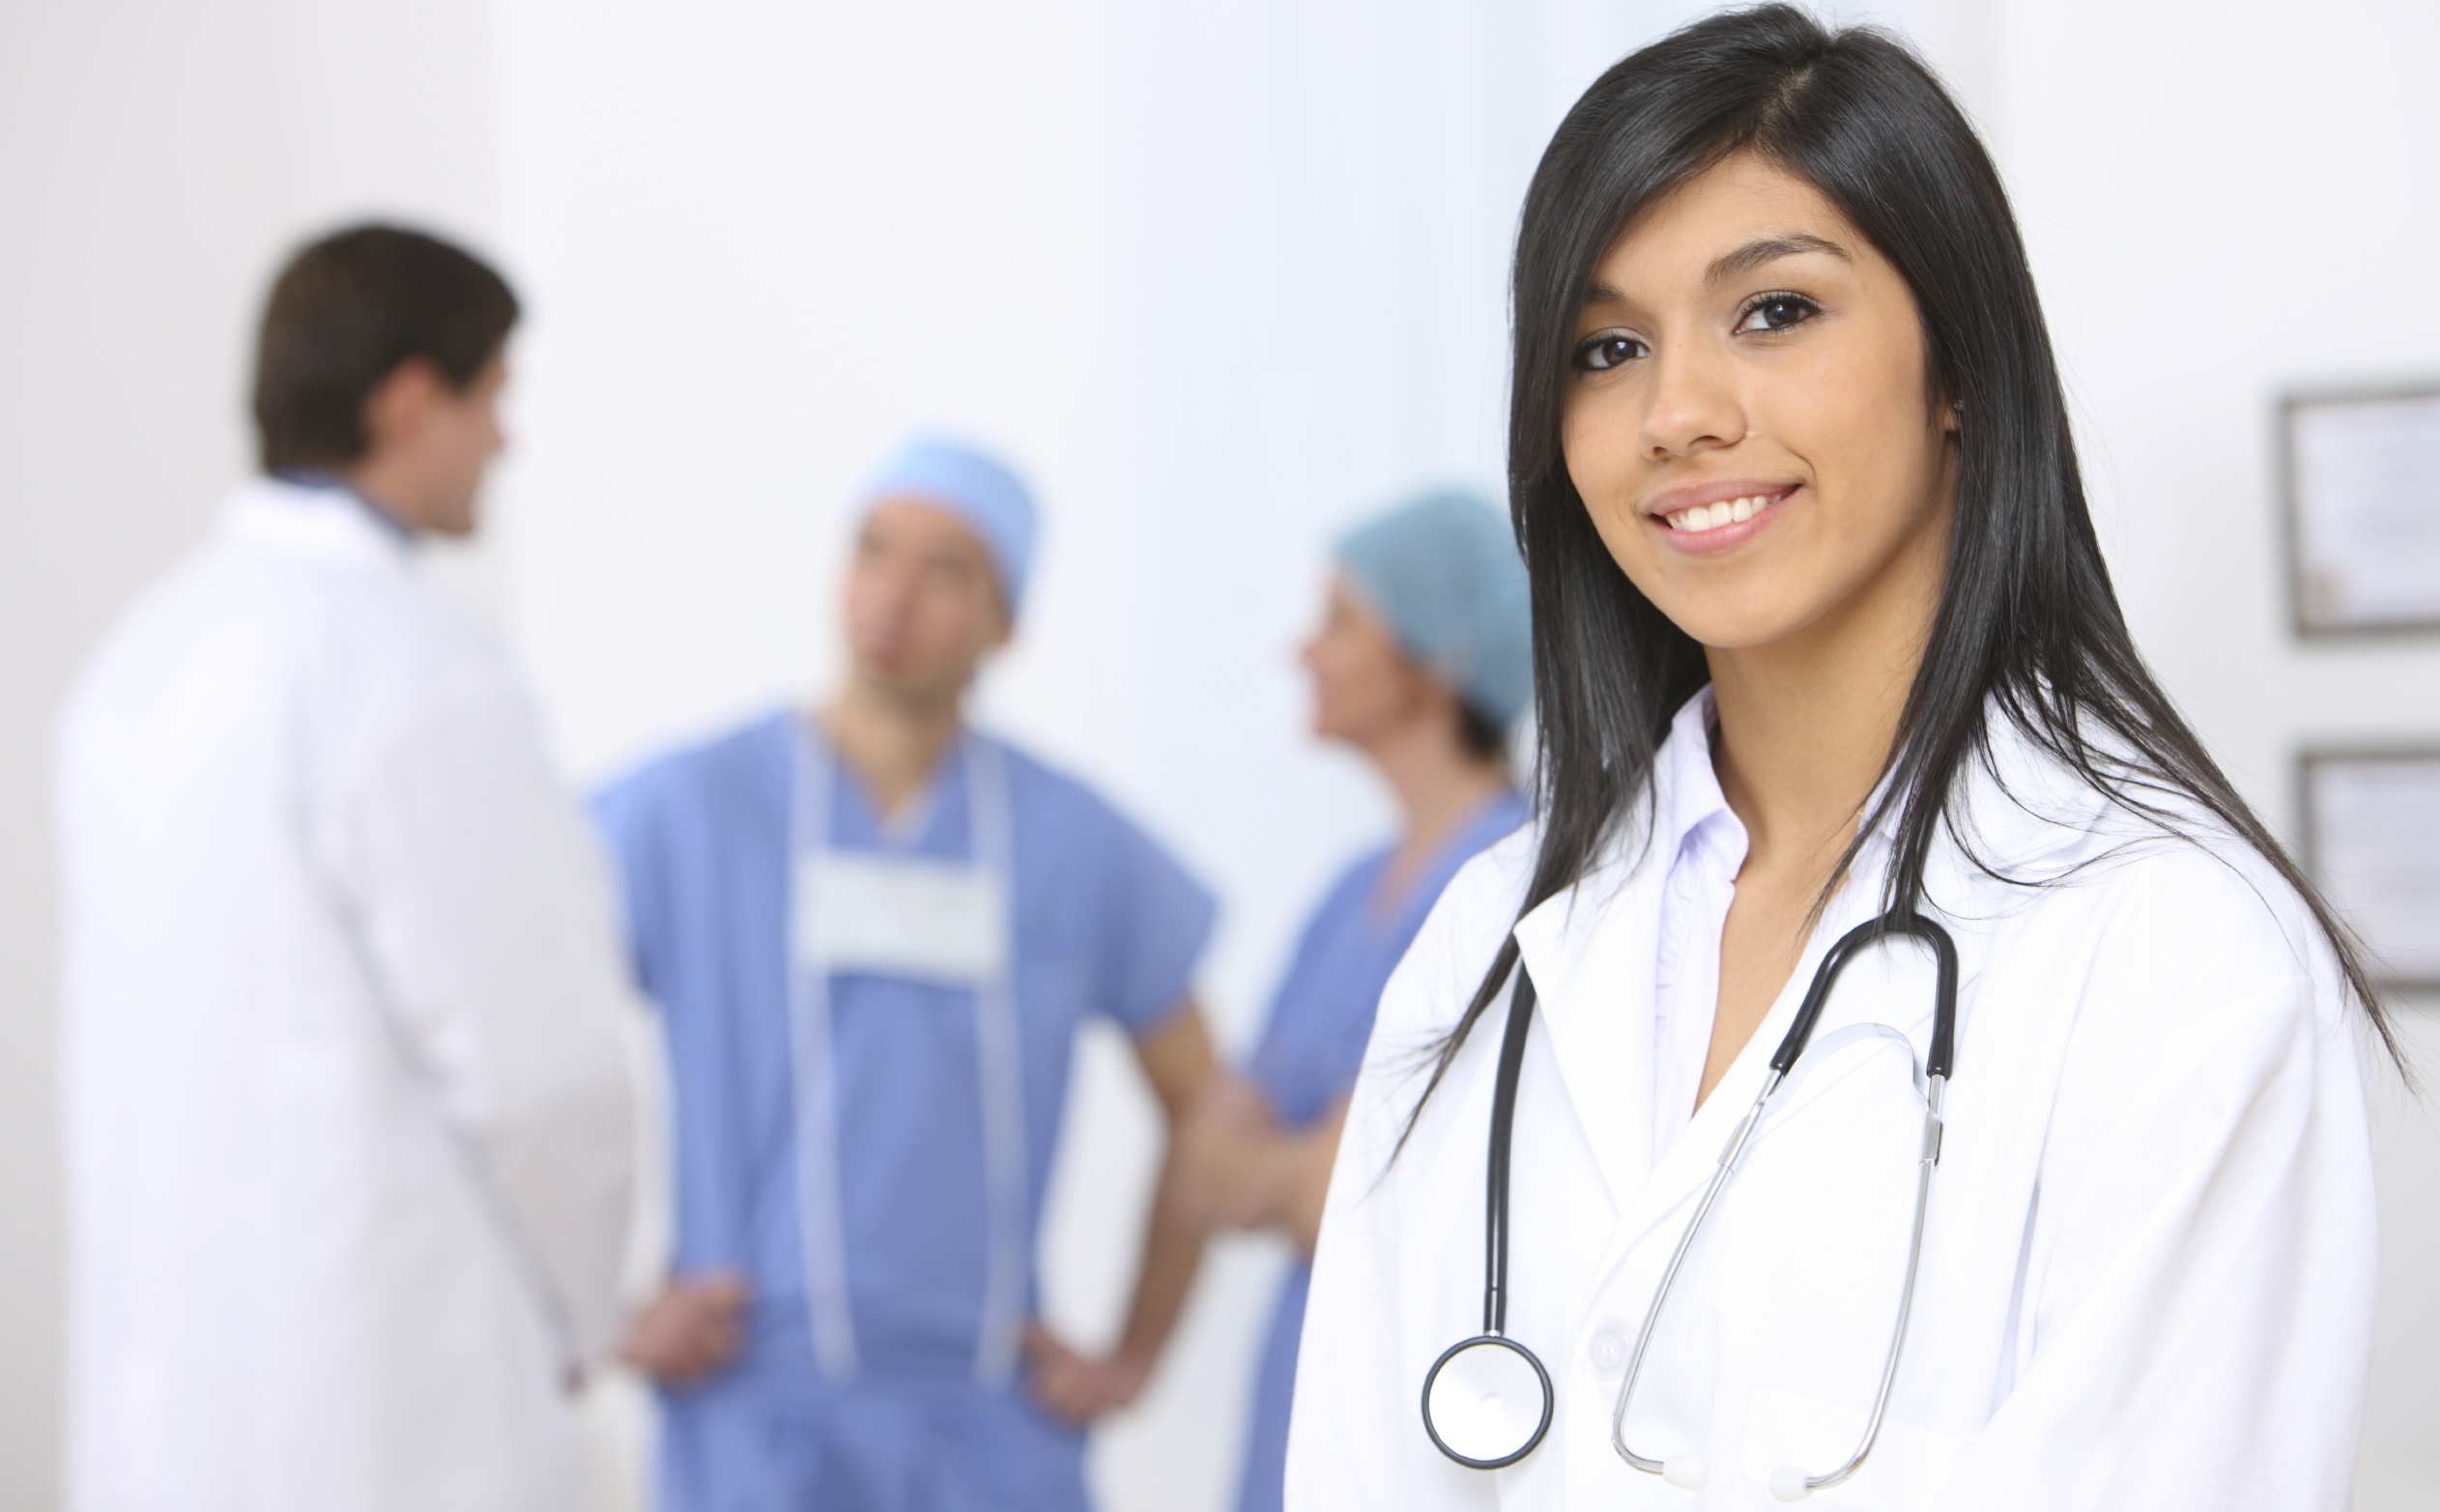 smiling_medical_doctor_with_stethoscope_on_the_hospitals_background_1350367266